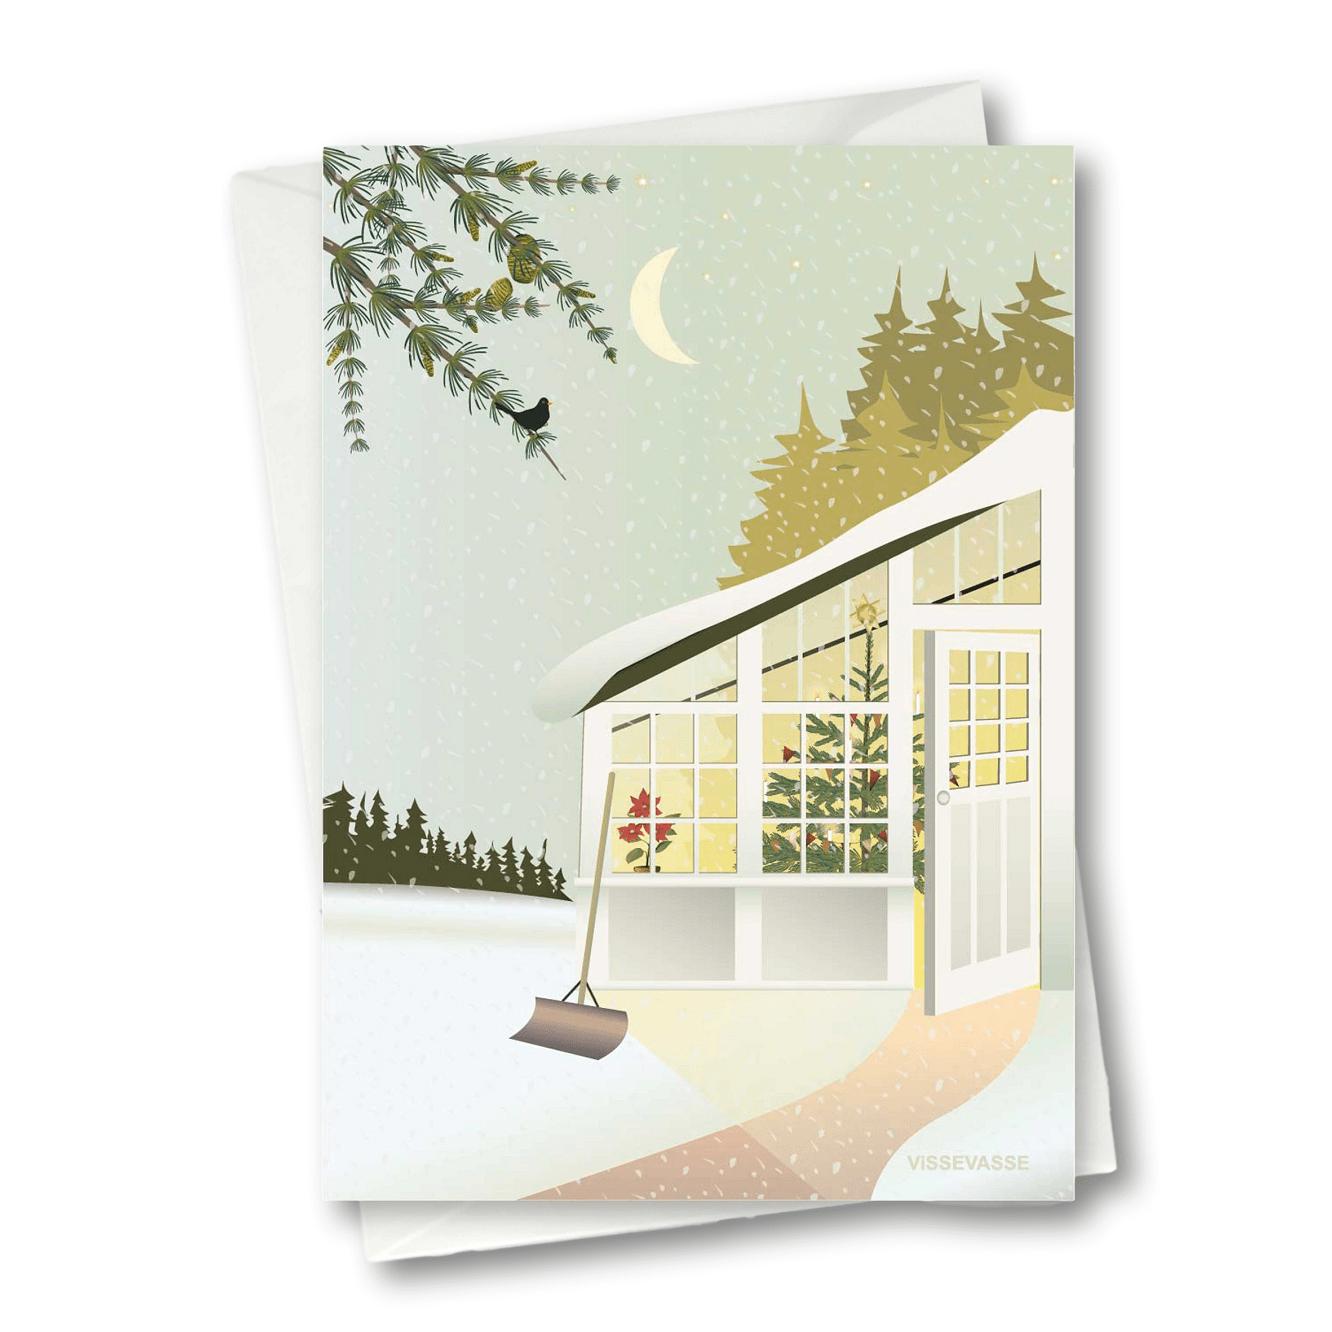 Vissevasse Christmas In The Greenhouse Greeting Card, 10,5x15cm